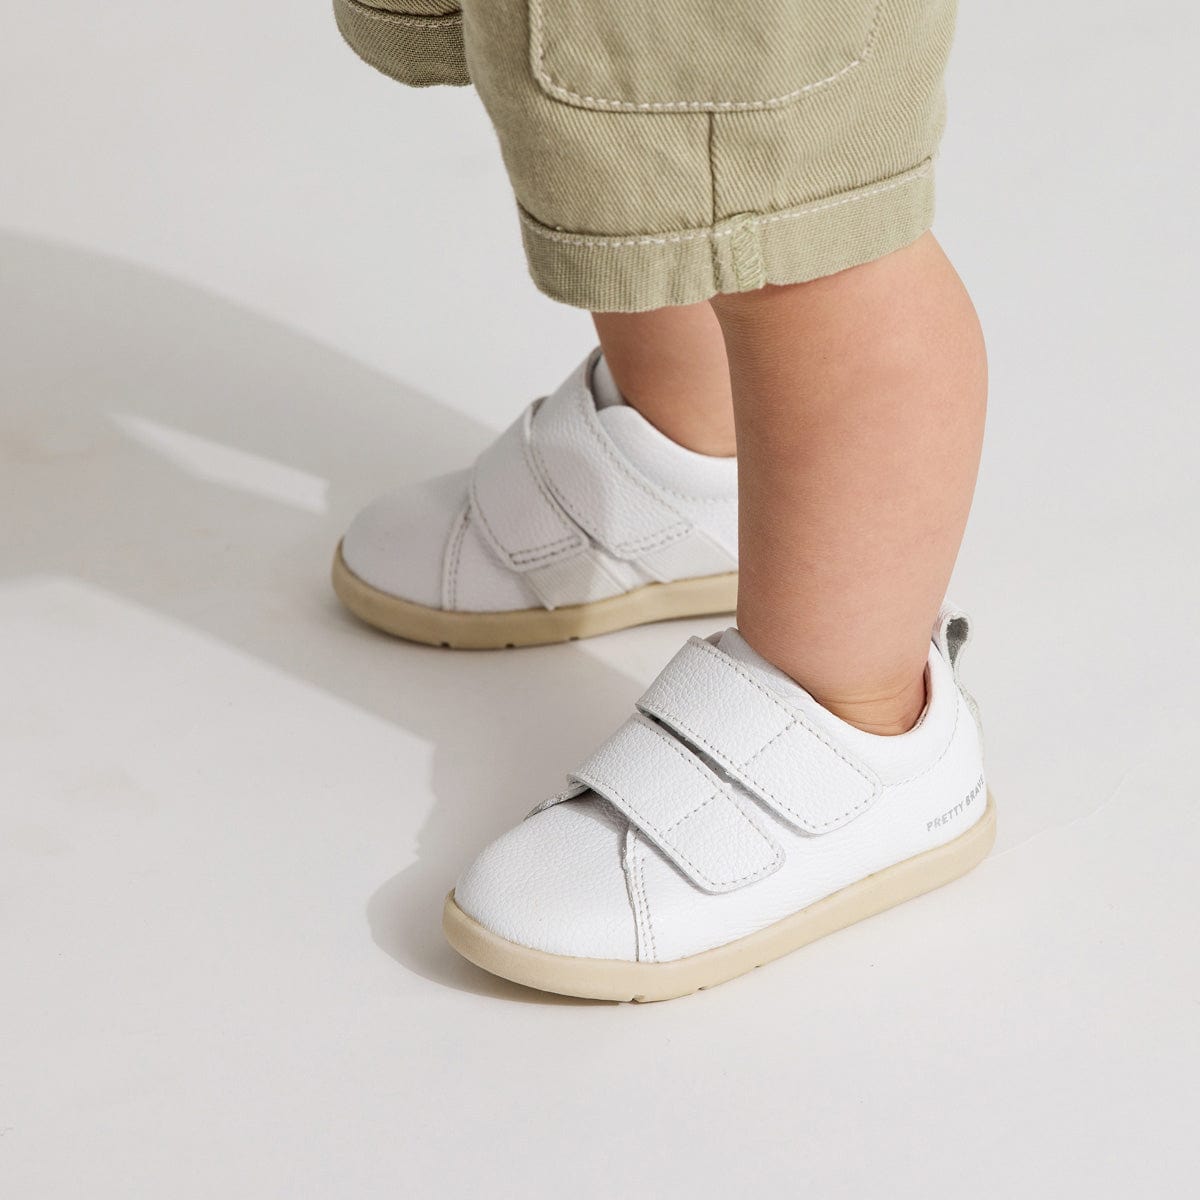 Pretty Brave Baby Shoes Brooklyn - White